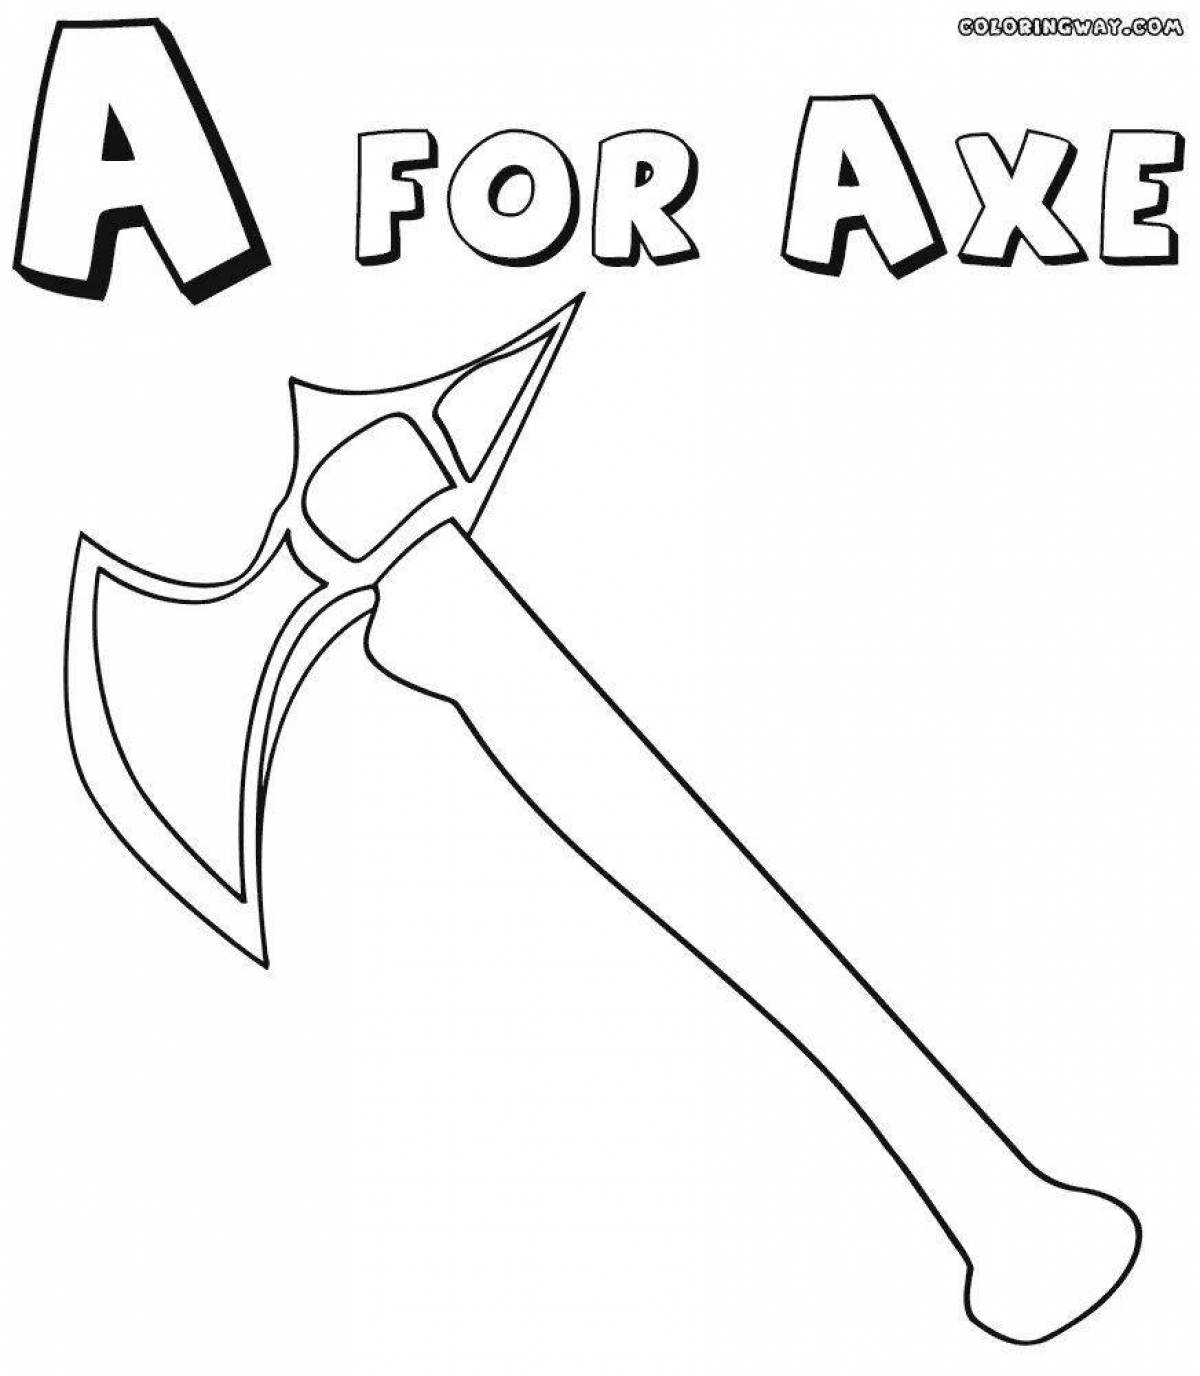 Creative minecraft ax coloring page